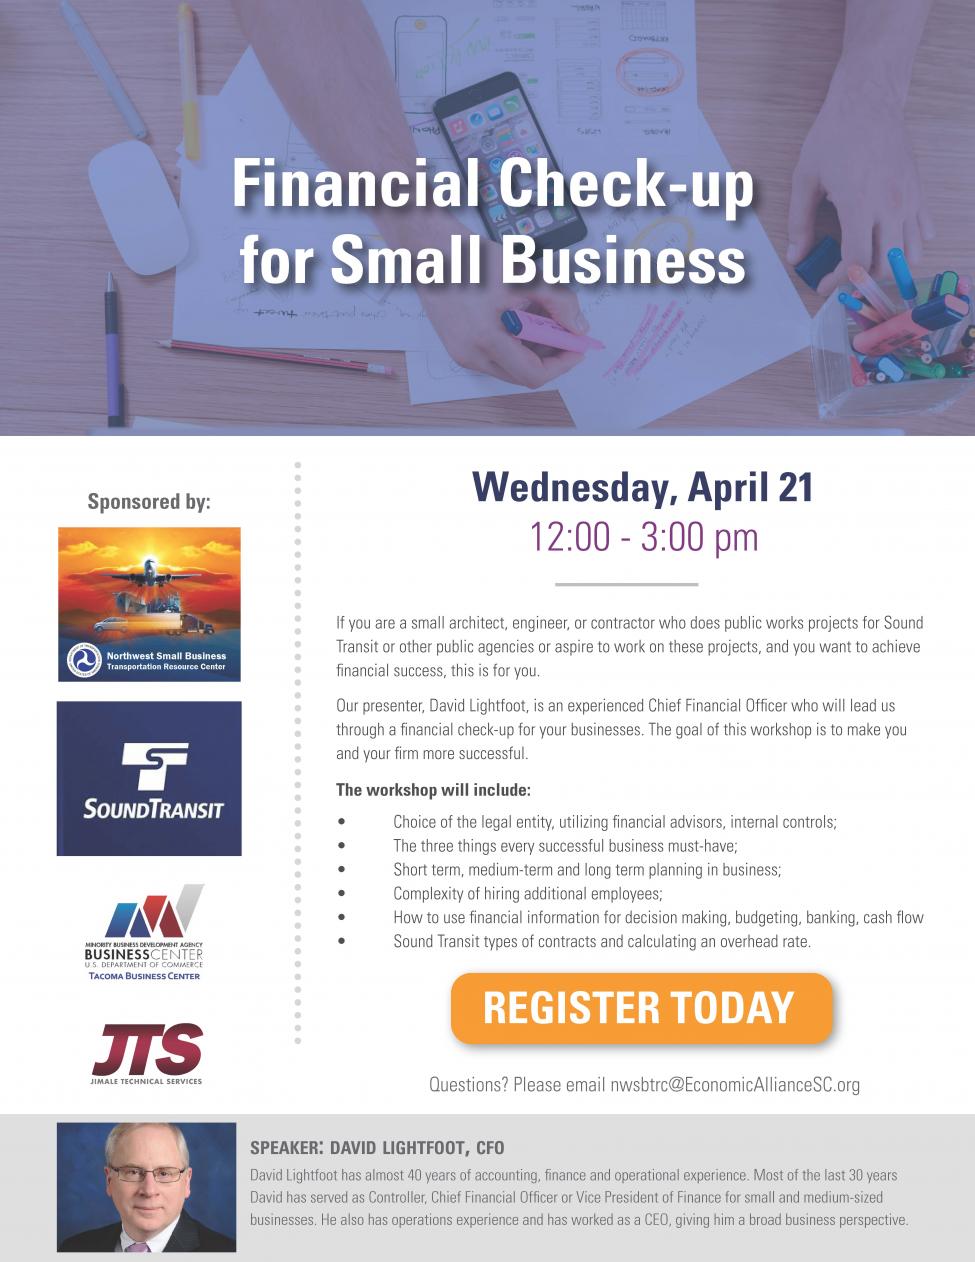 image of Financial Check-up for small business event flyer